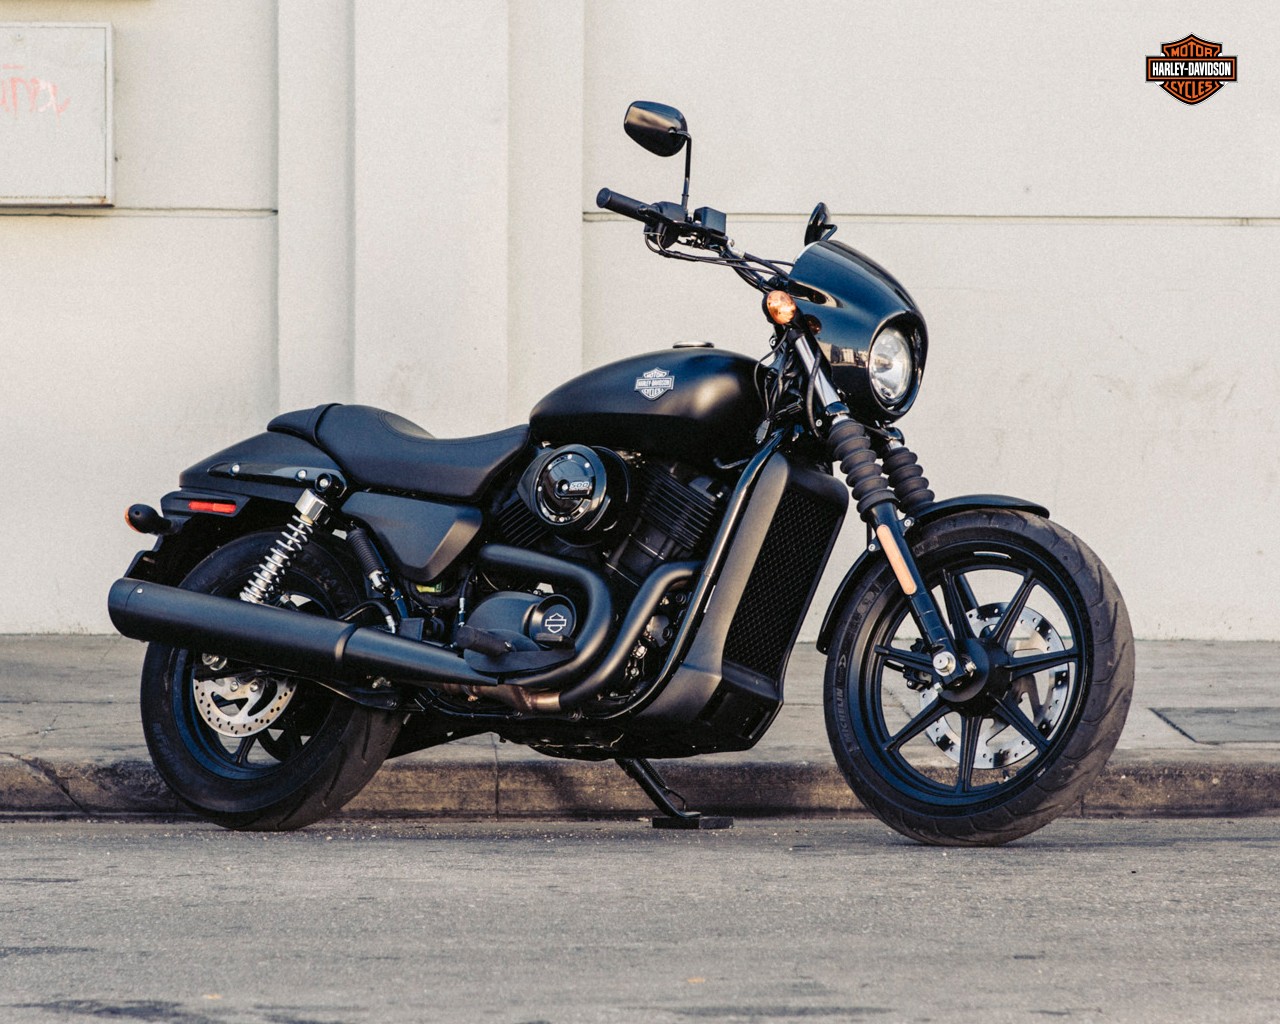 2015 Harley Davidson Street 500 Introduced With An Attractive Price Tag Autoevolution